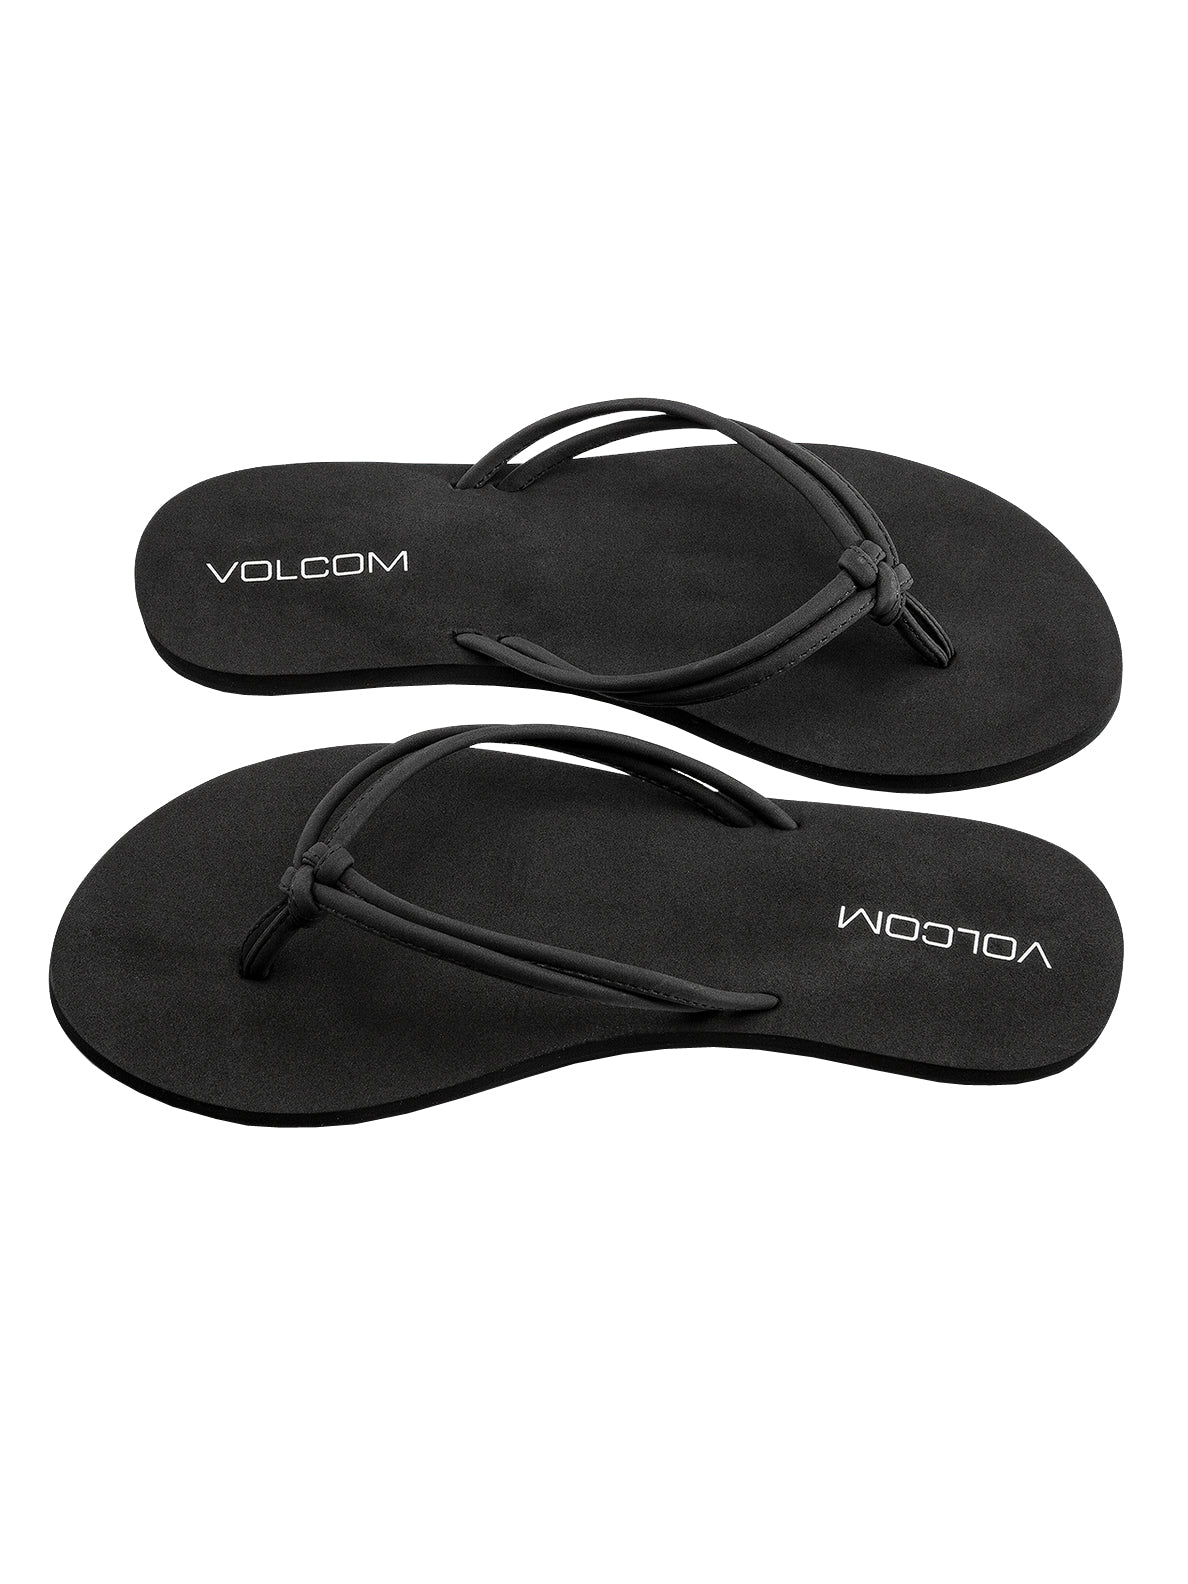 Volcom Forever and Ever 2 Womens Sandal BKO23-Black Out 8